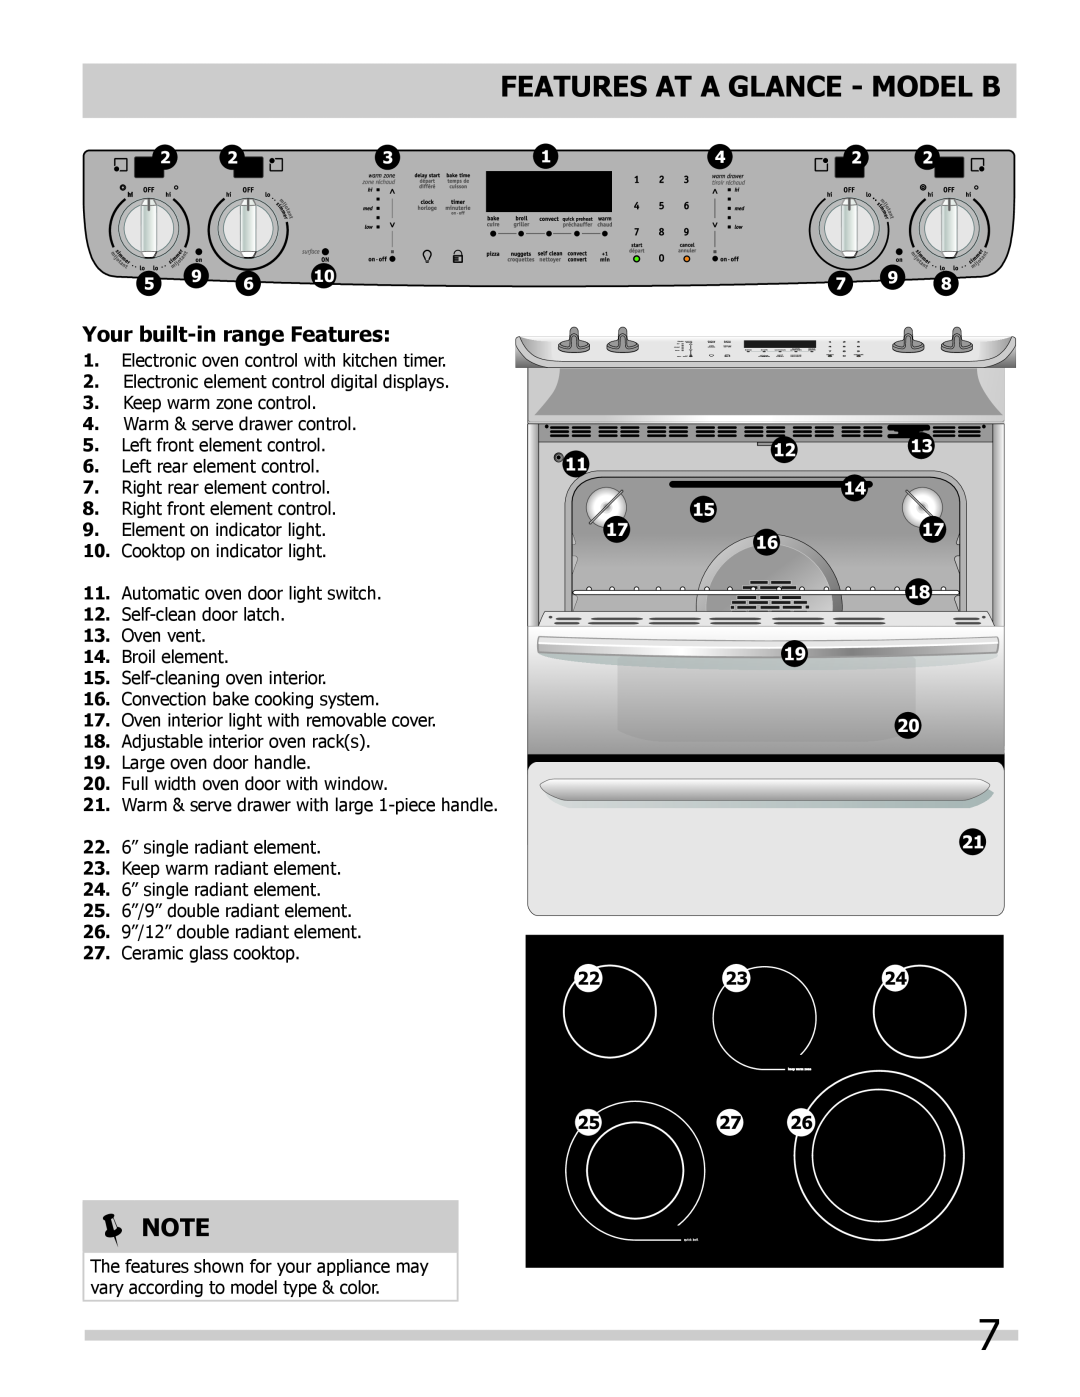 Frigidaire 318205804 manual FEATURES AT A GLANCE - mODEL B,  Note, Your built-in range Features 